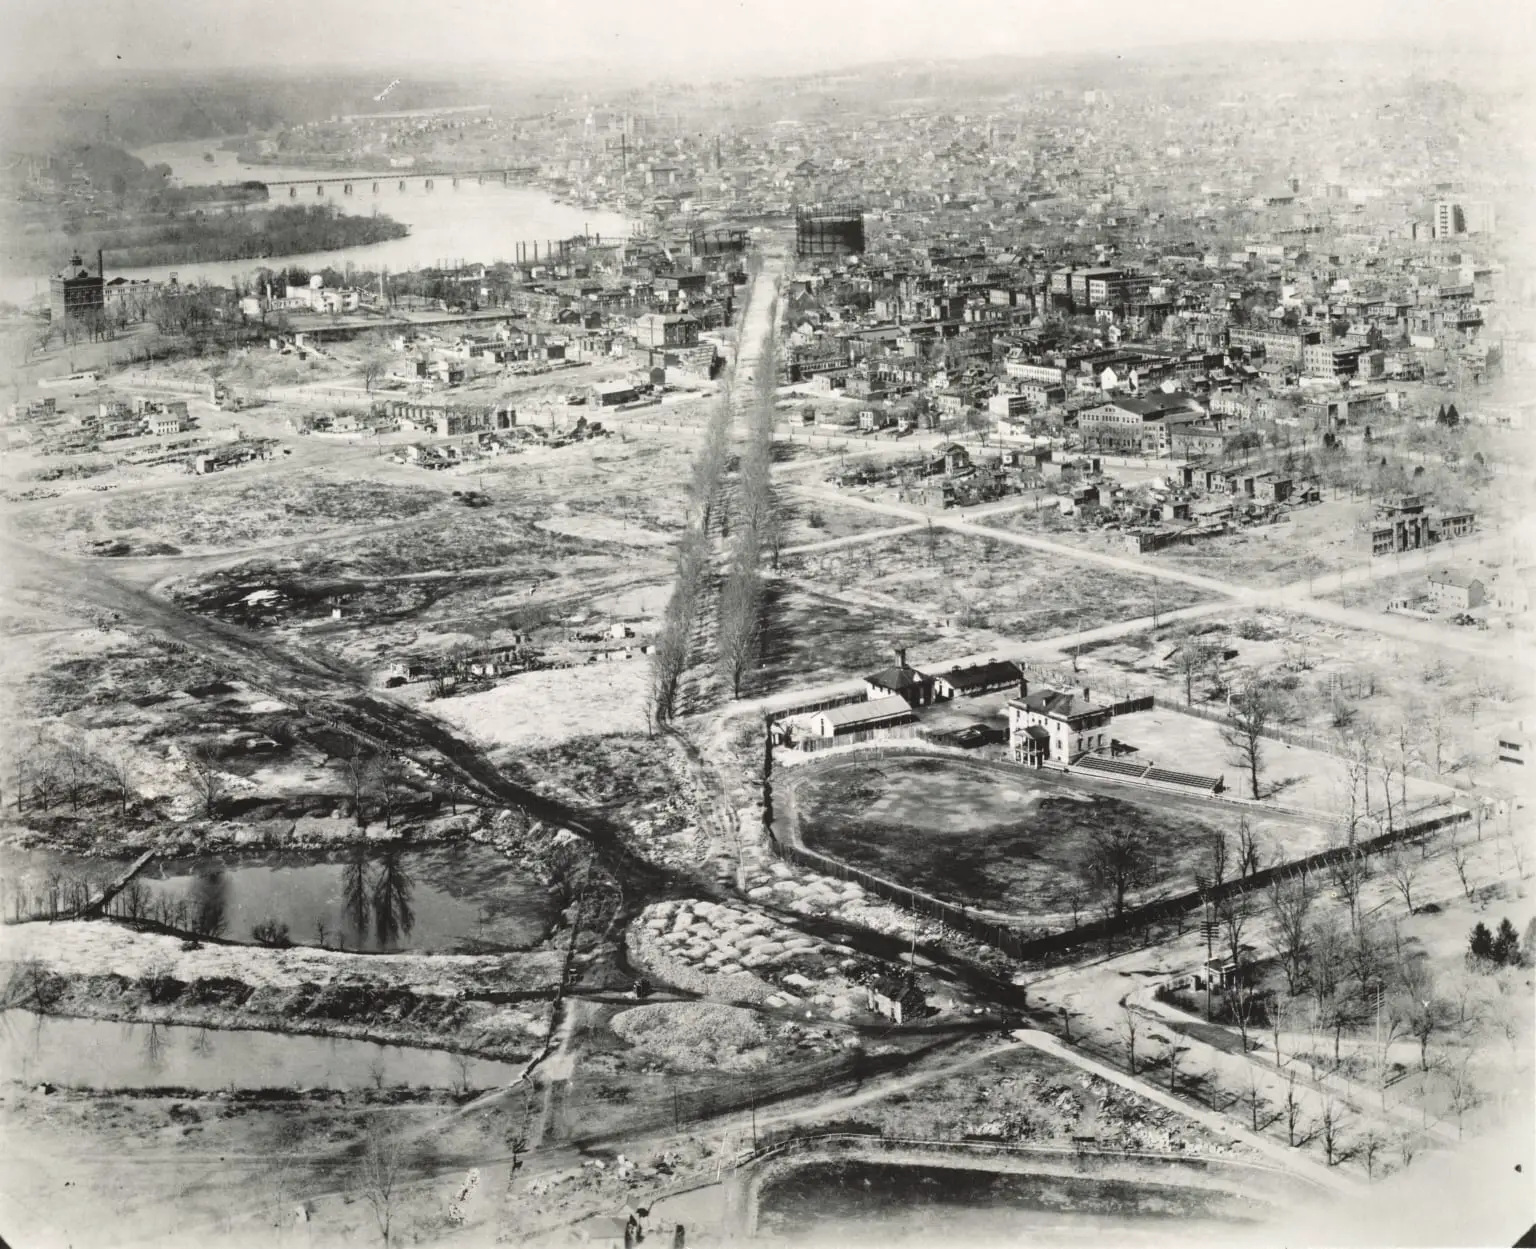 view northwest from the Washington Monument in 1894